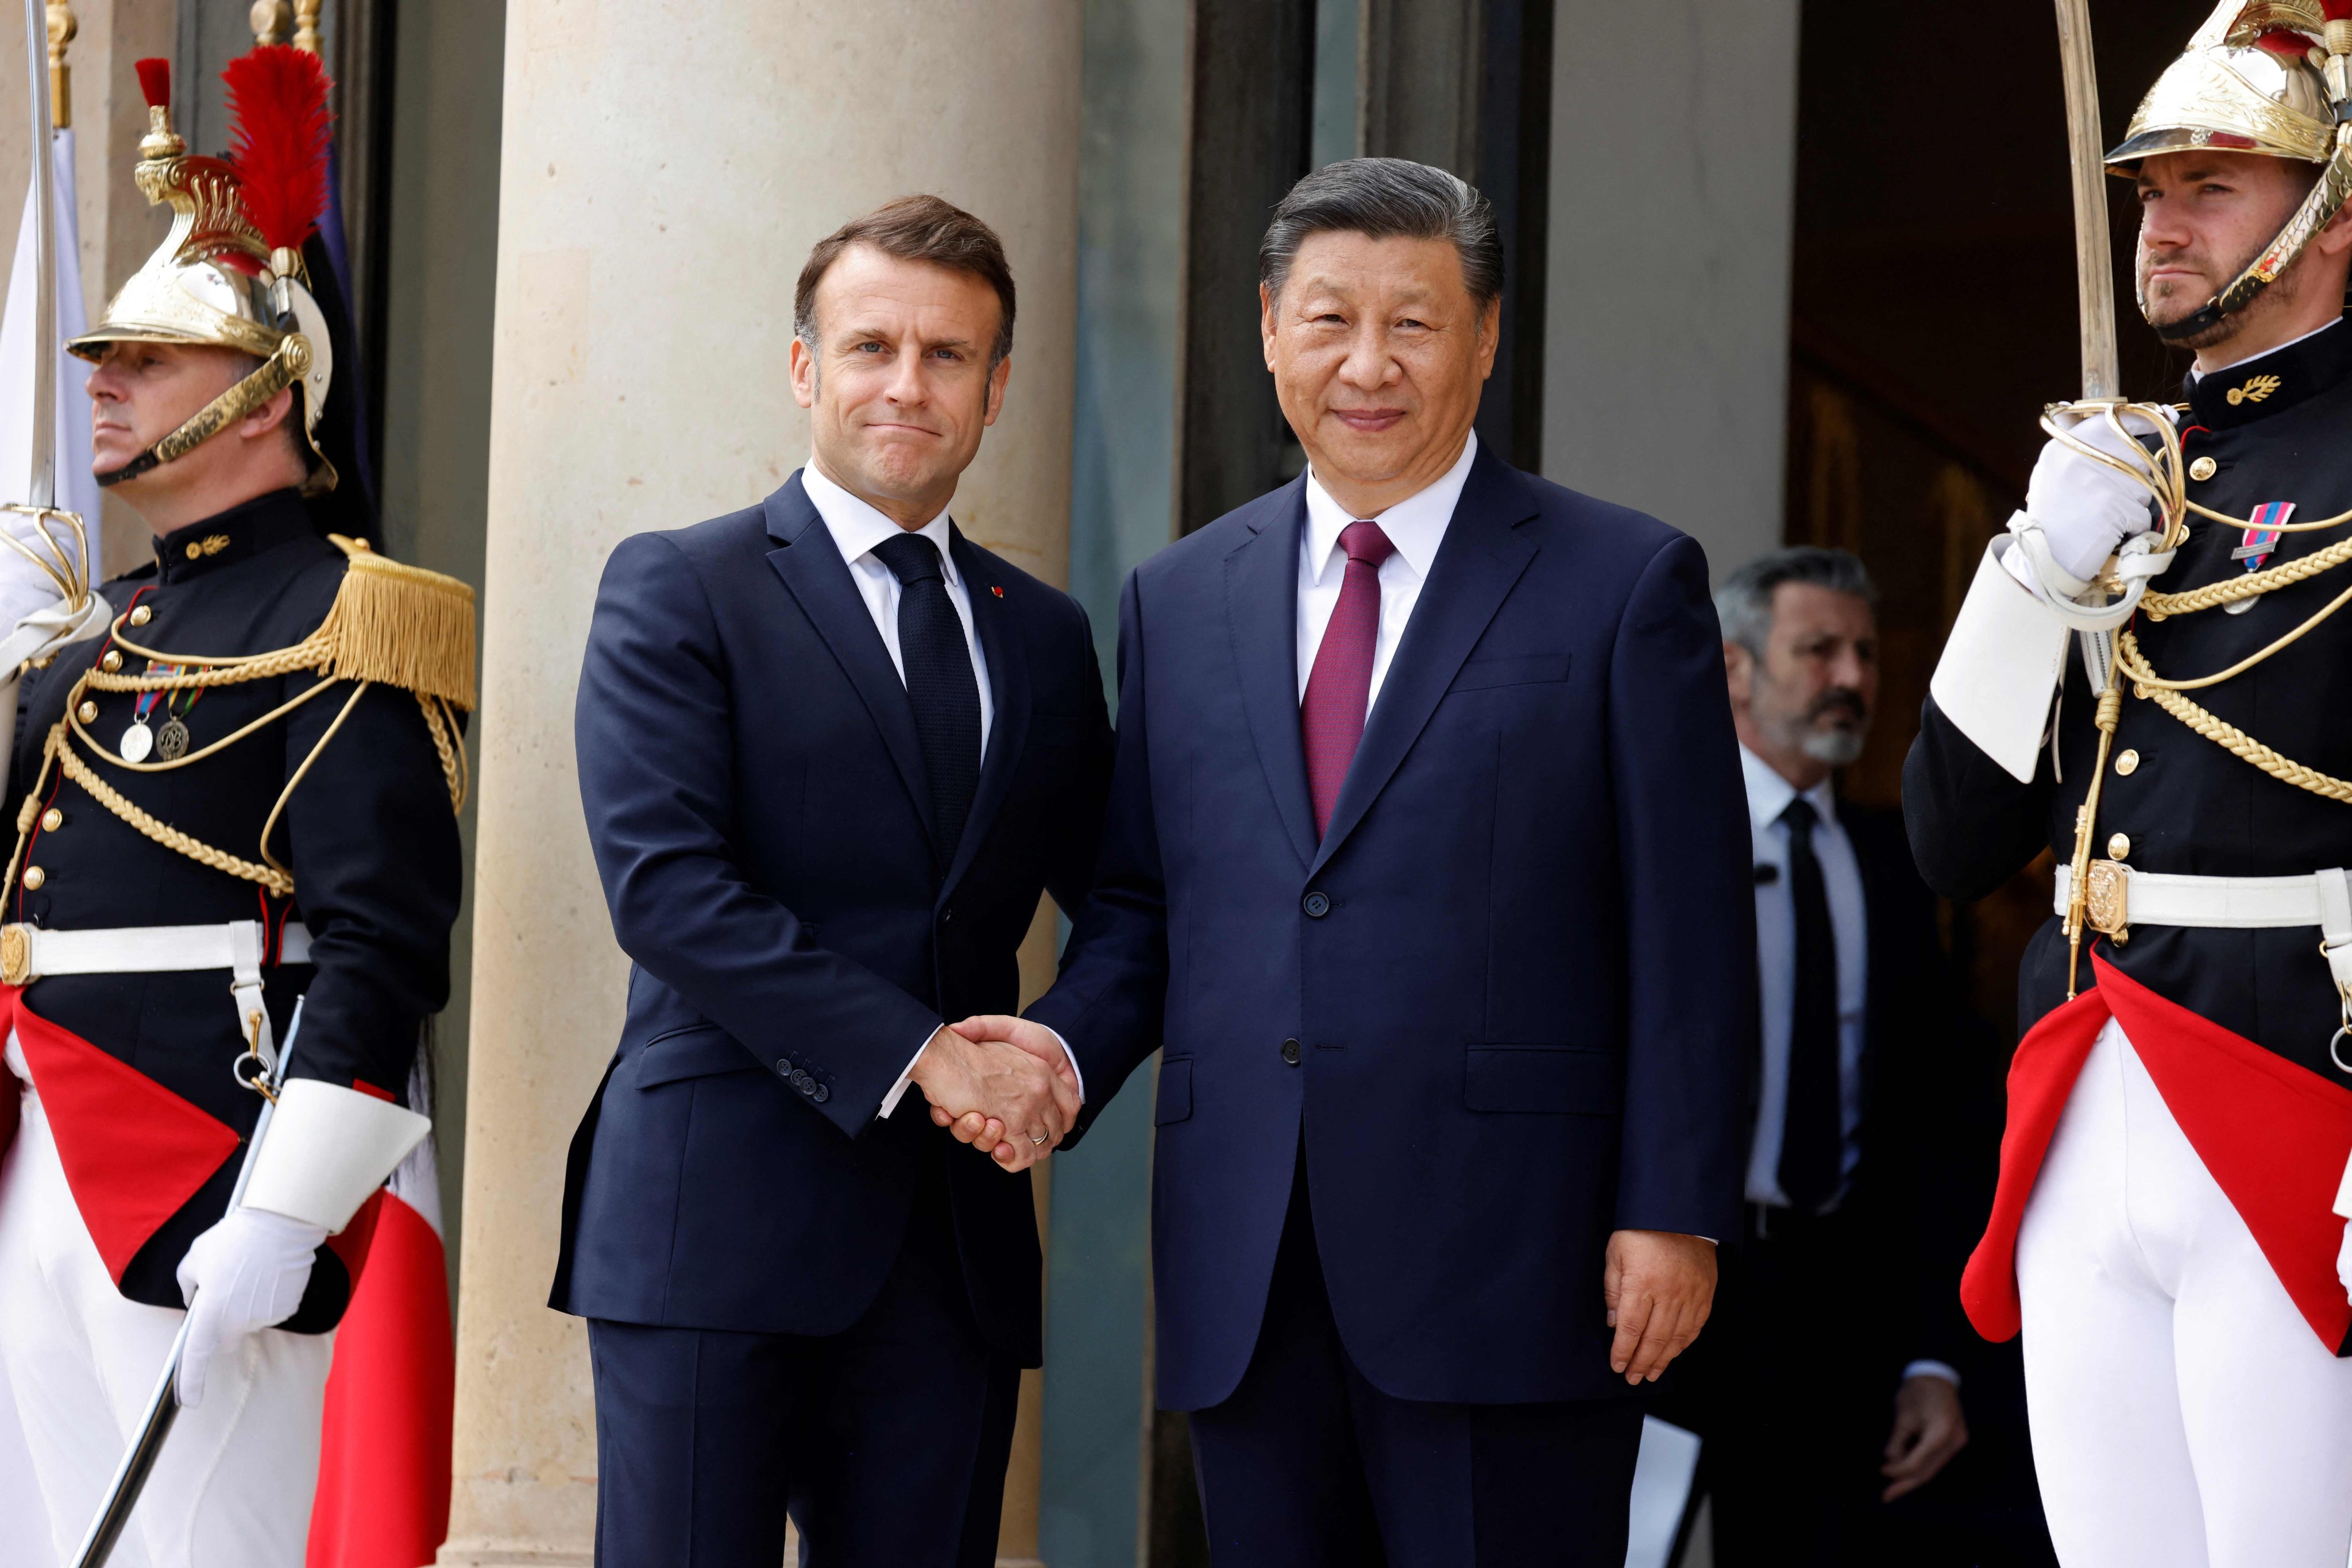 French President Emmanuel Macron welcomes his Chinese counterpart Xi Jinping to the Élysée Palace in Paris on Monday. Photo: AFP
